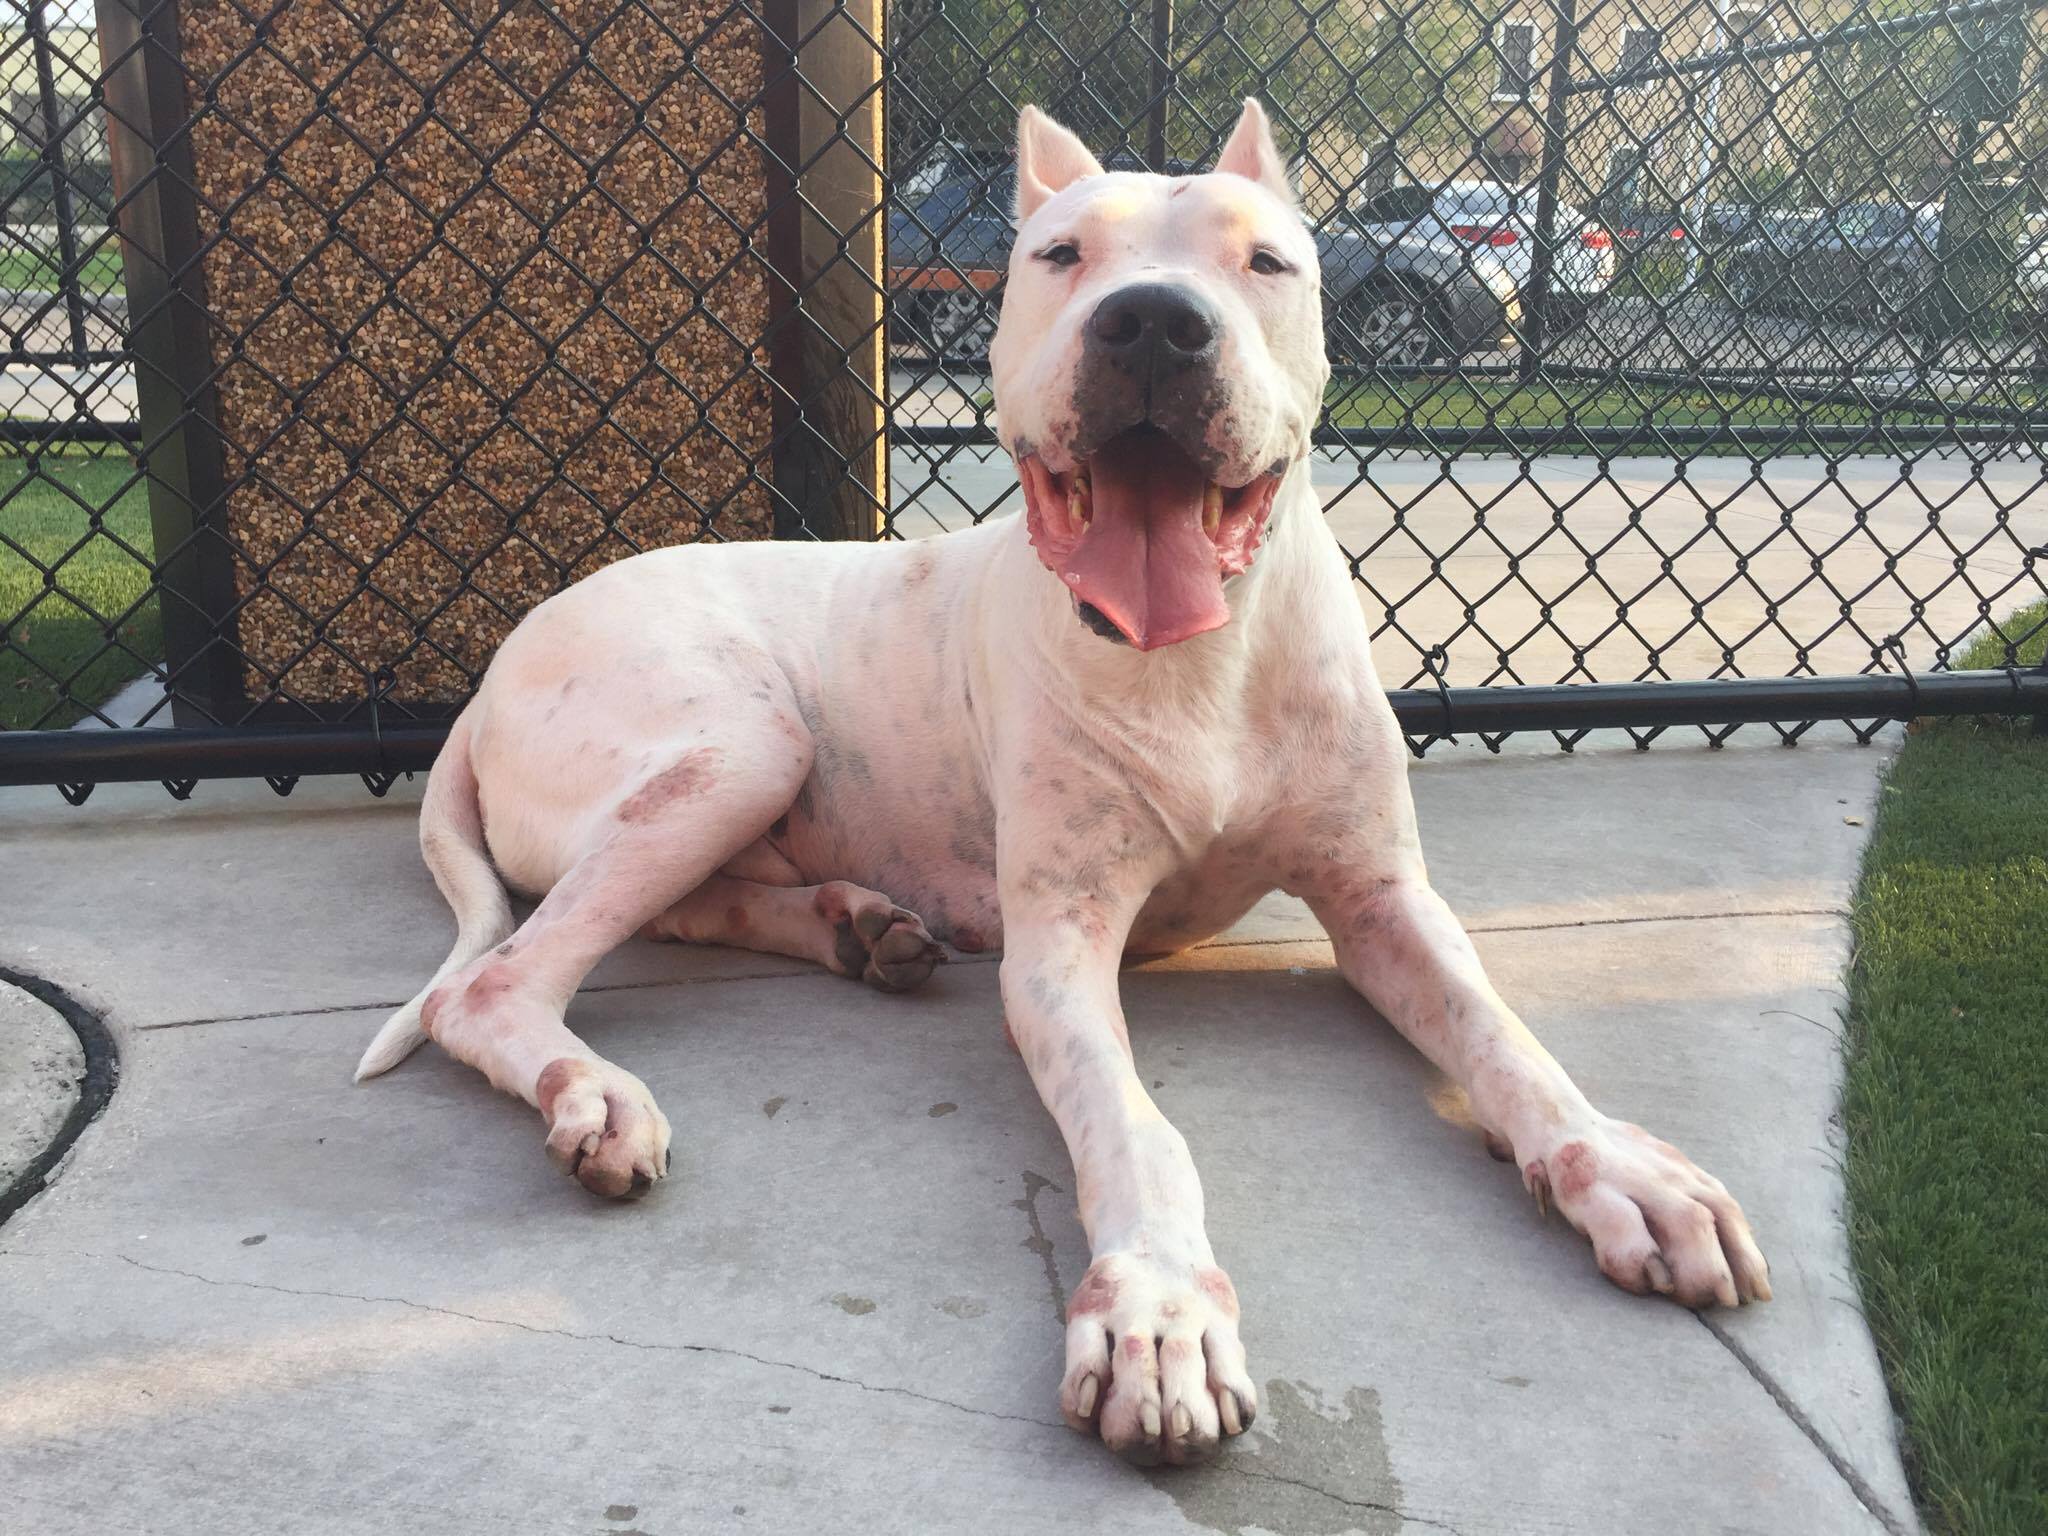 About Rescue Efforts For Dogo Argentino